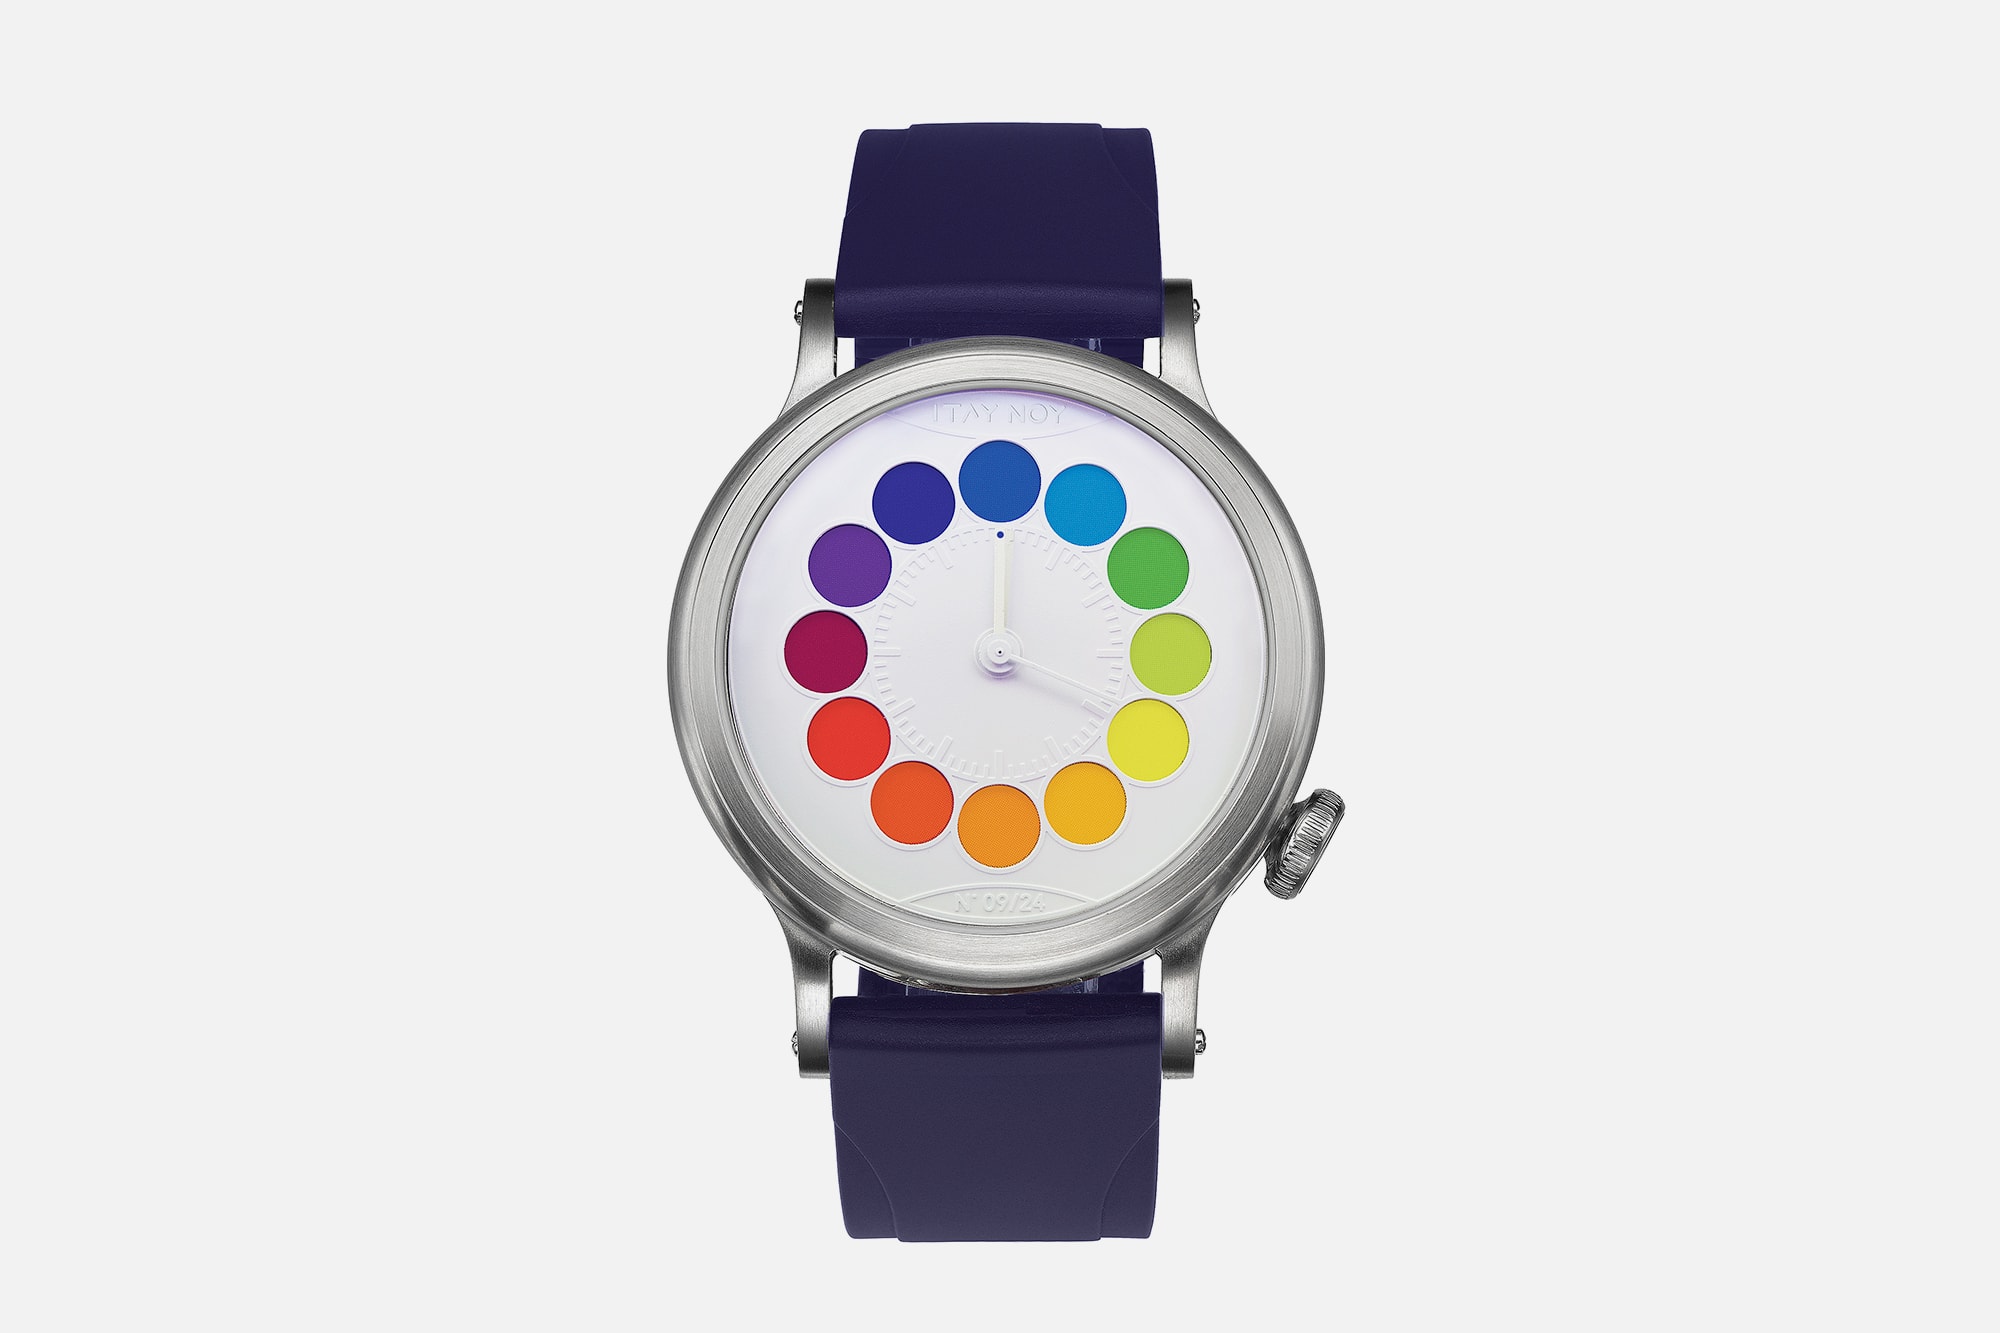 Introducing Two New Colorful Watches from Itay Noy